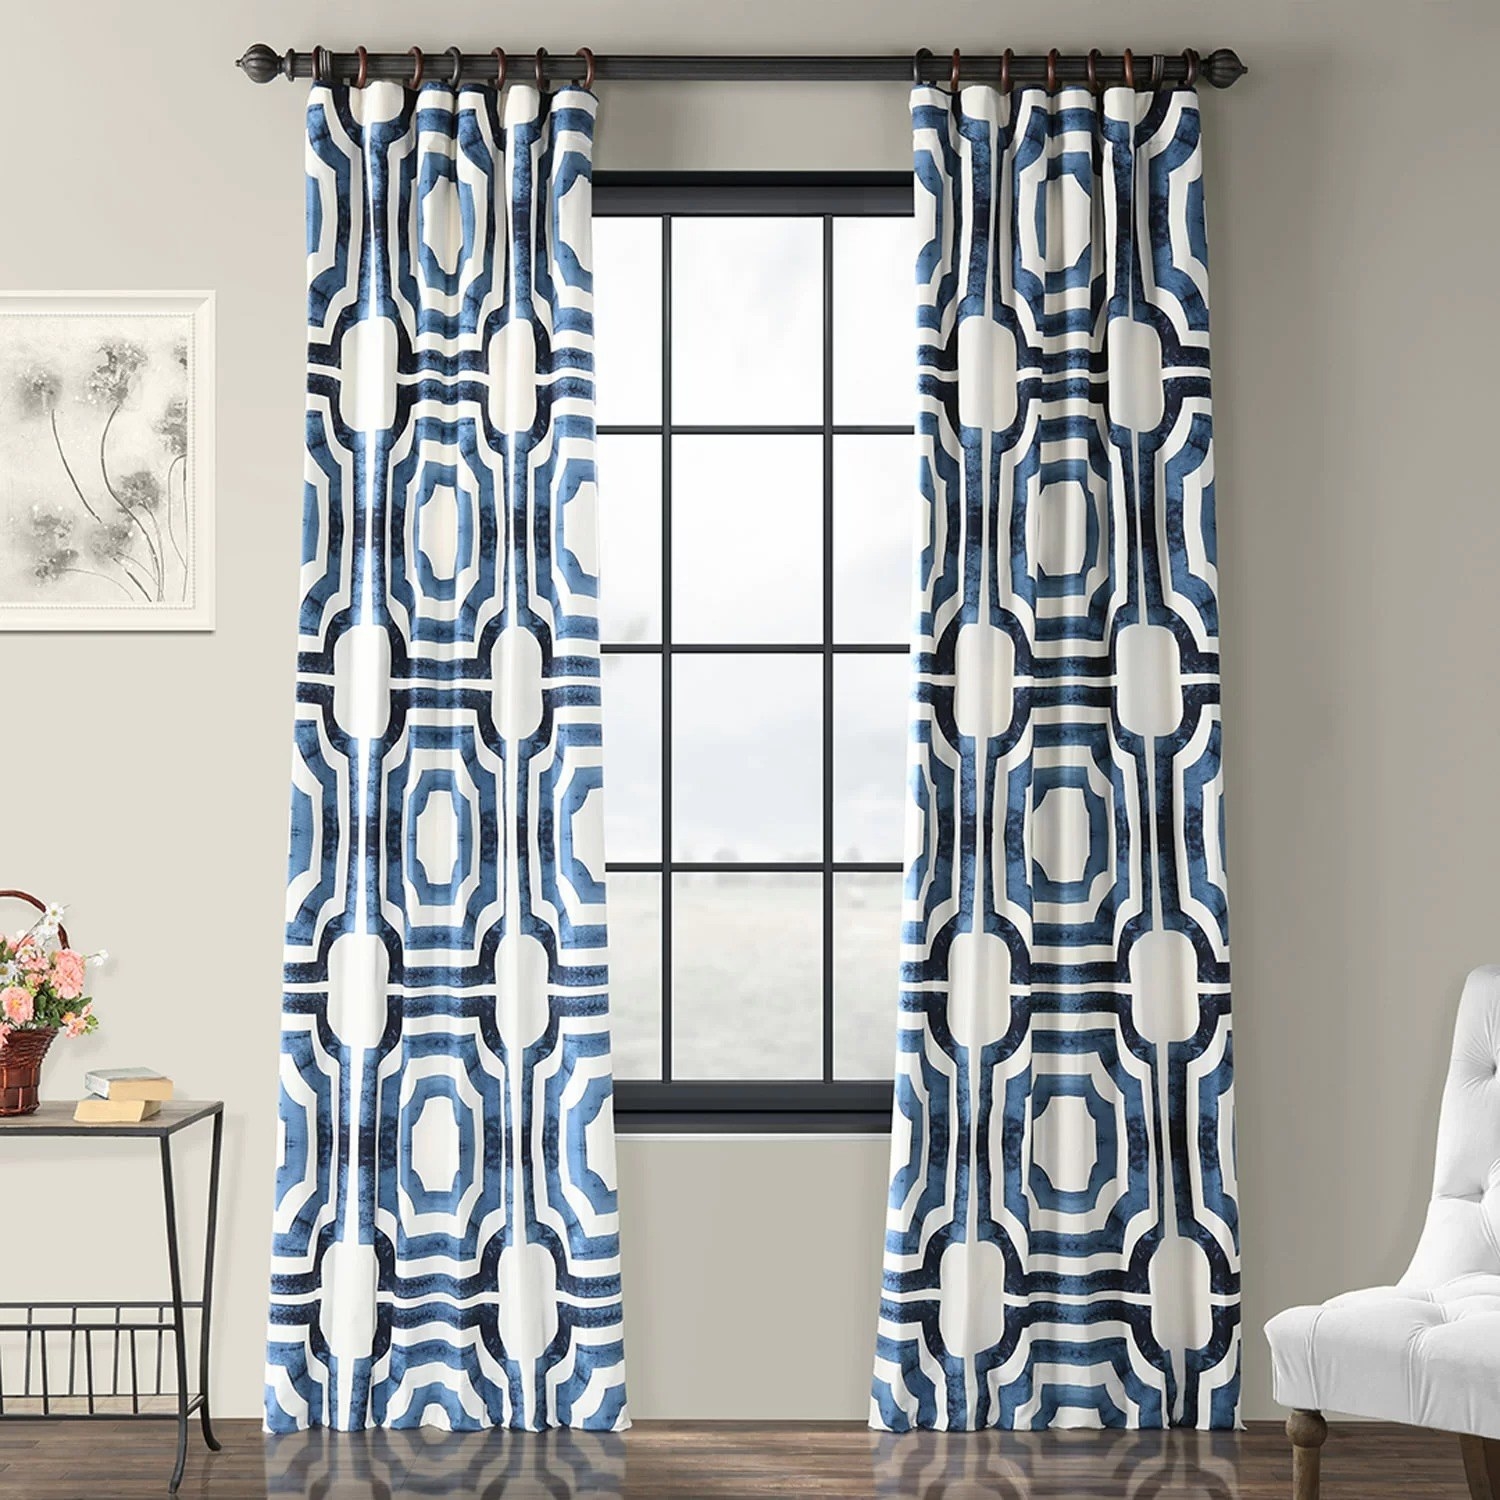 One curtain  panel with a geometric pattern on either side of a living room window